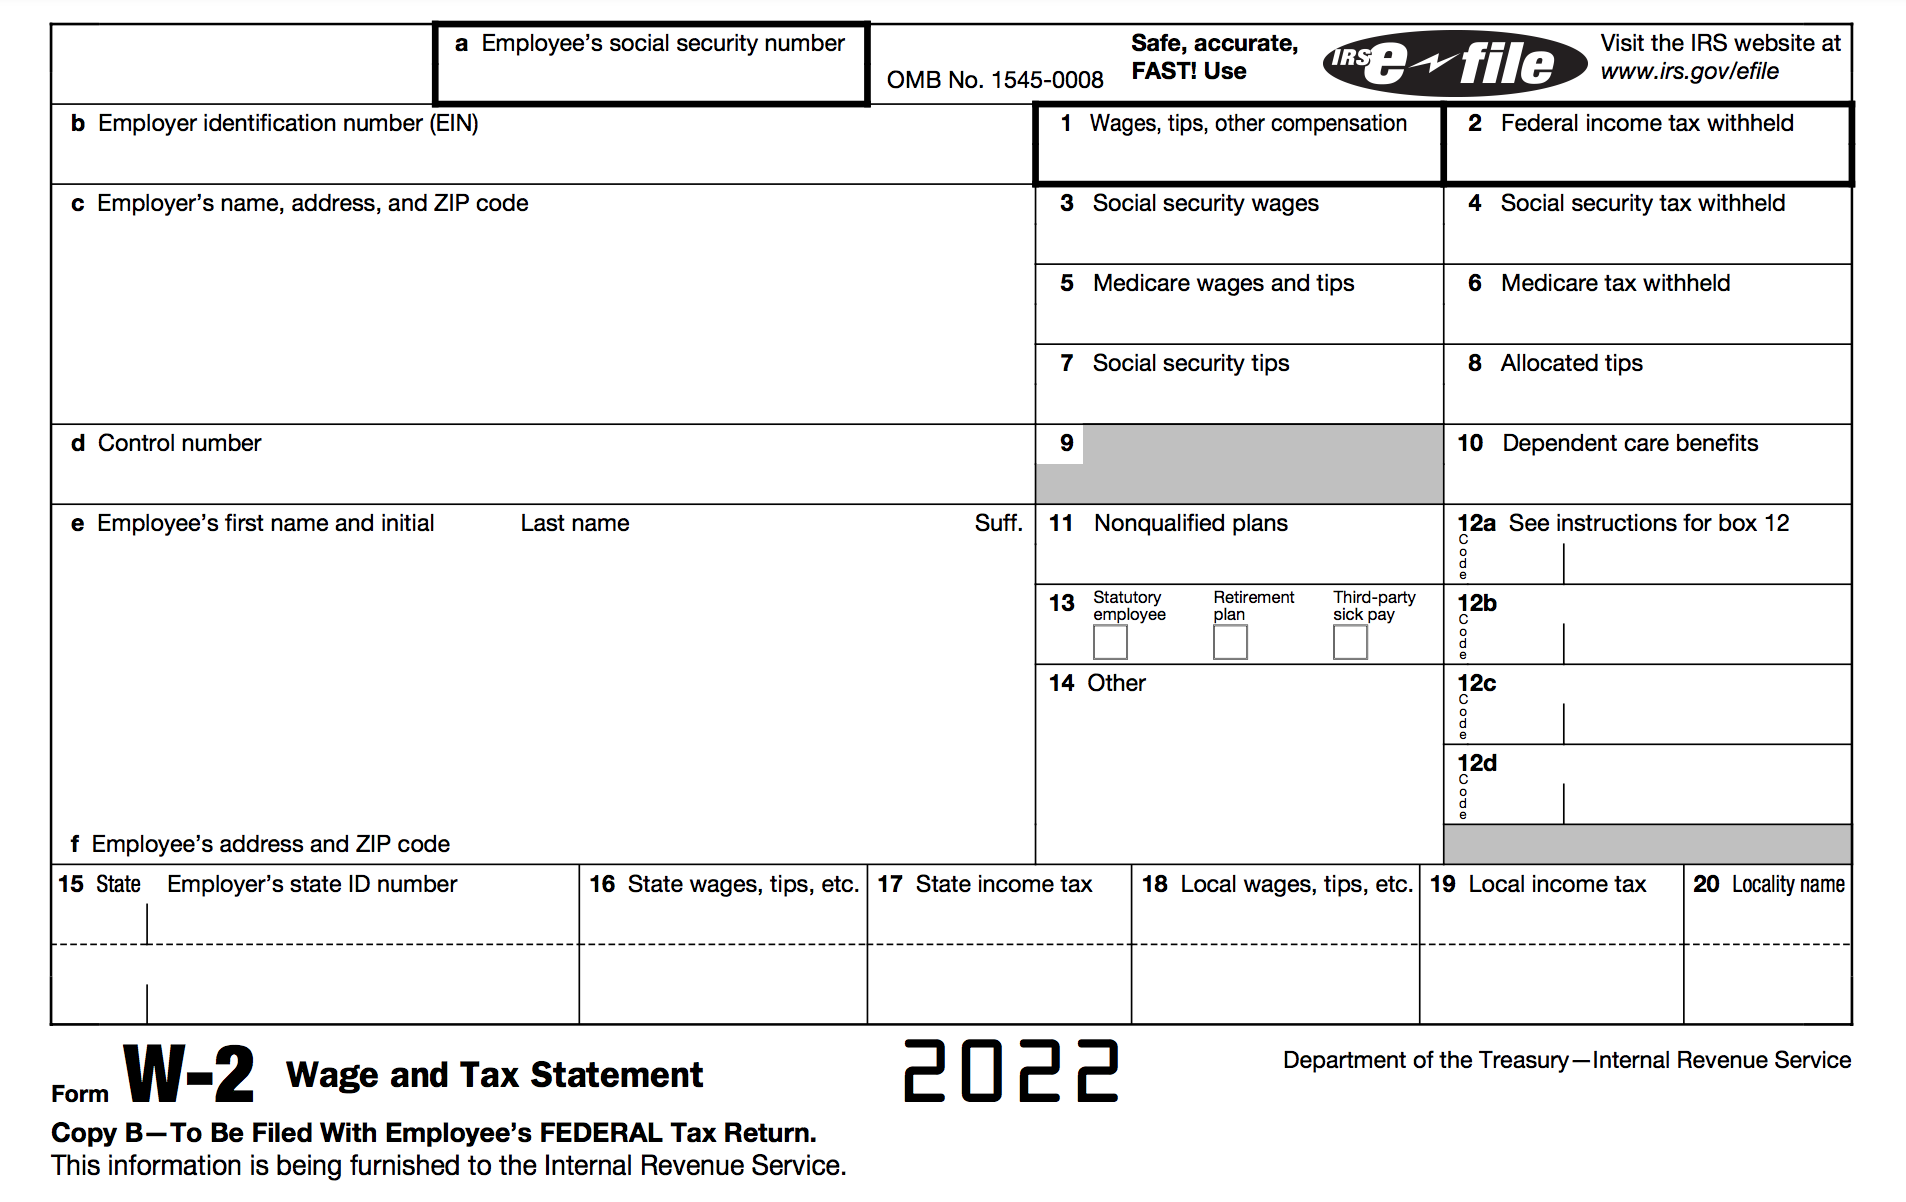 How To Fill Out A W-2 Tax Form | Smartasset regarding Irs.gov W2 Forms